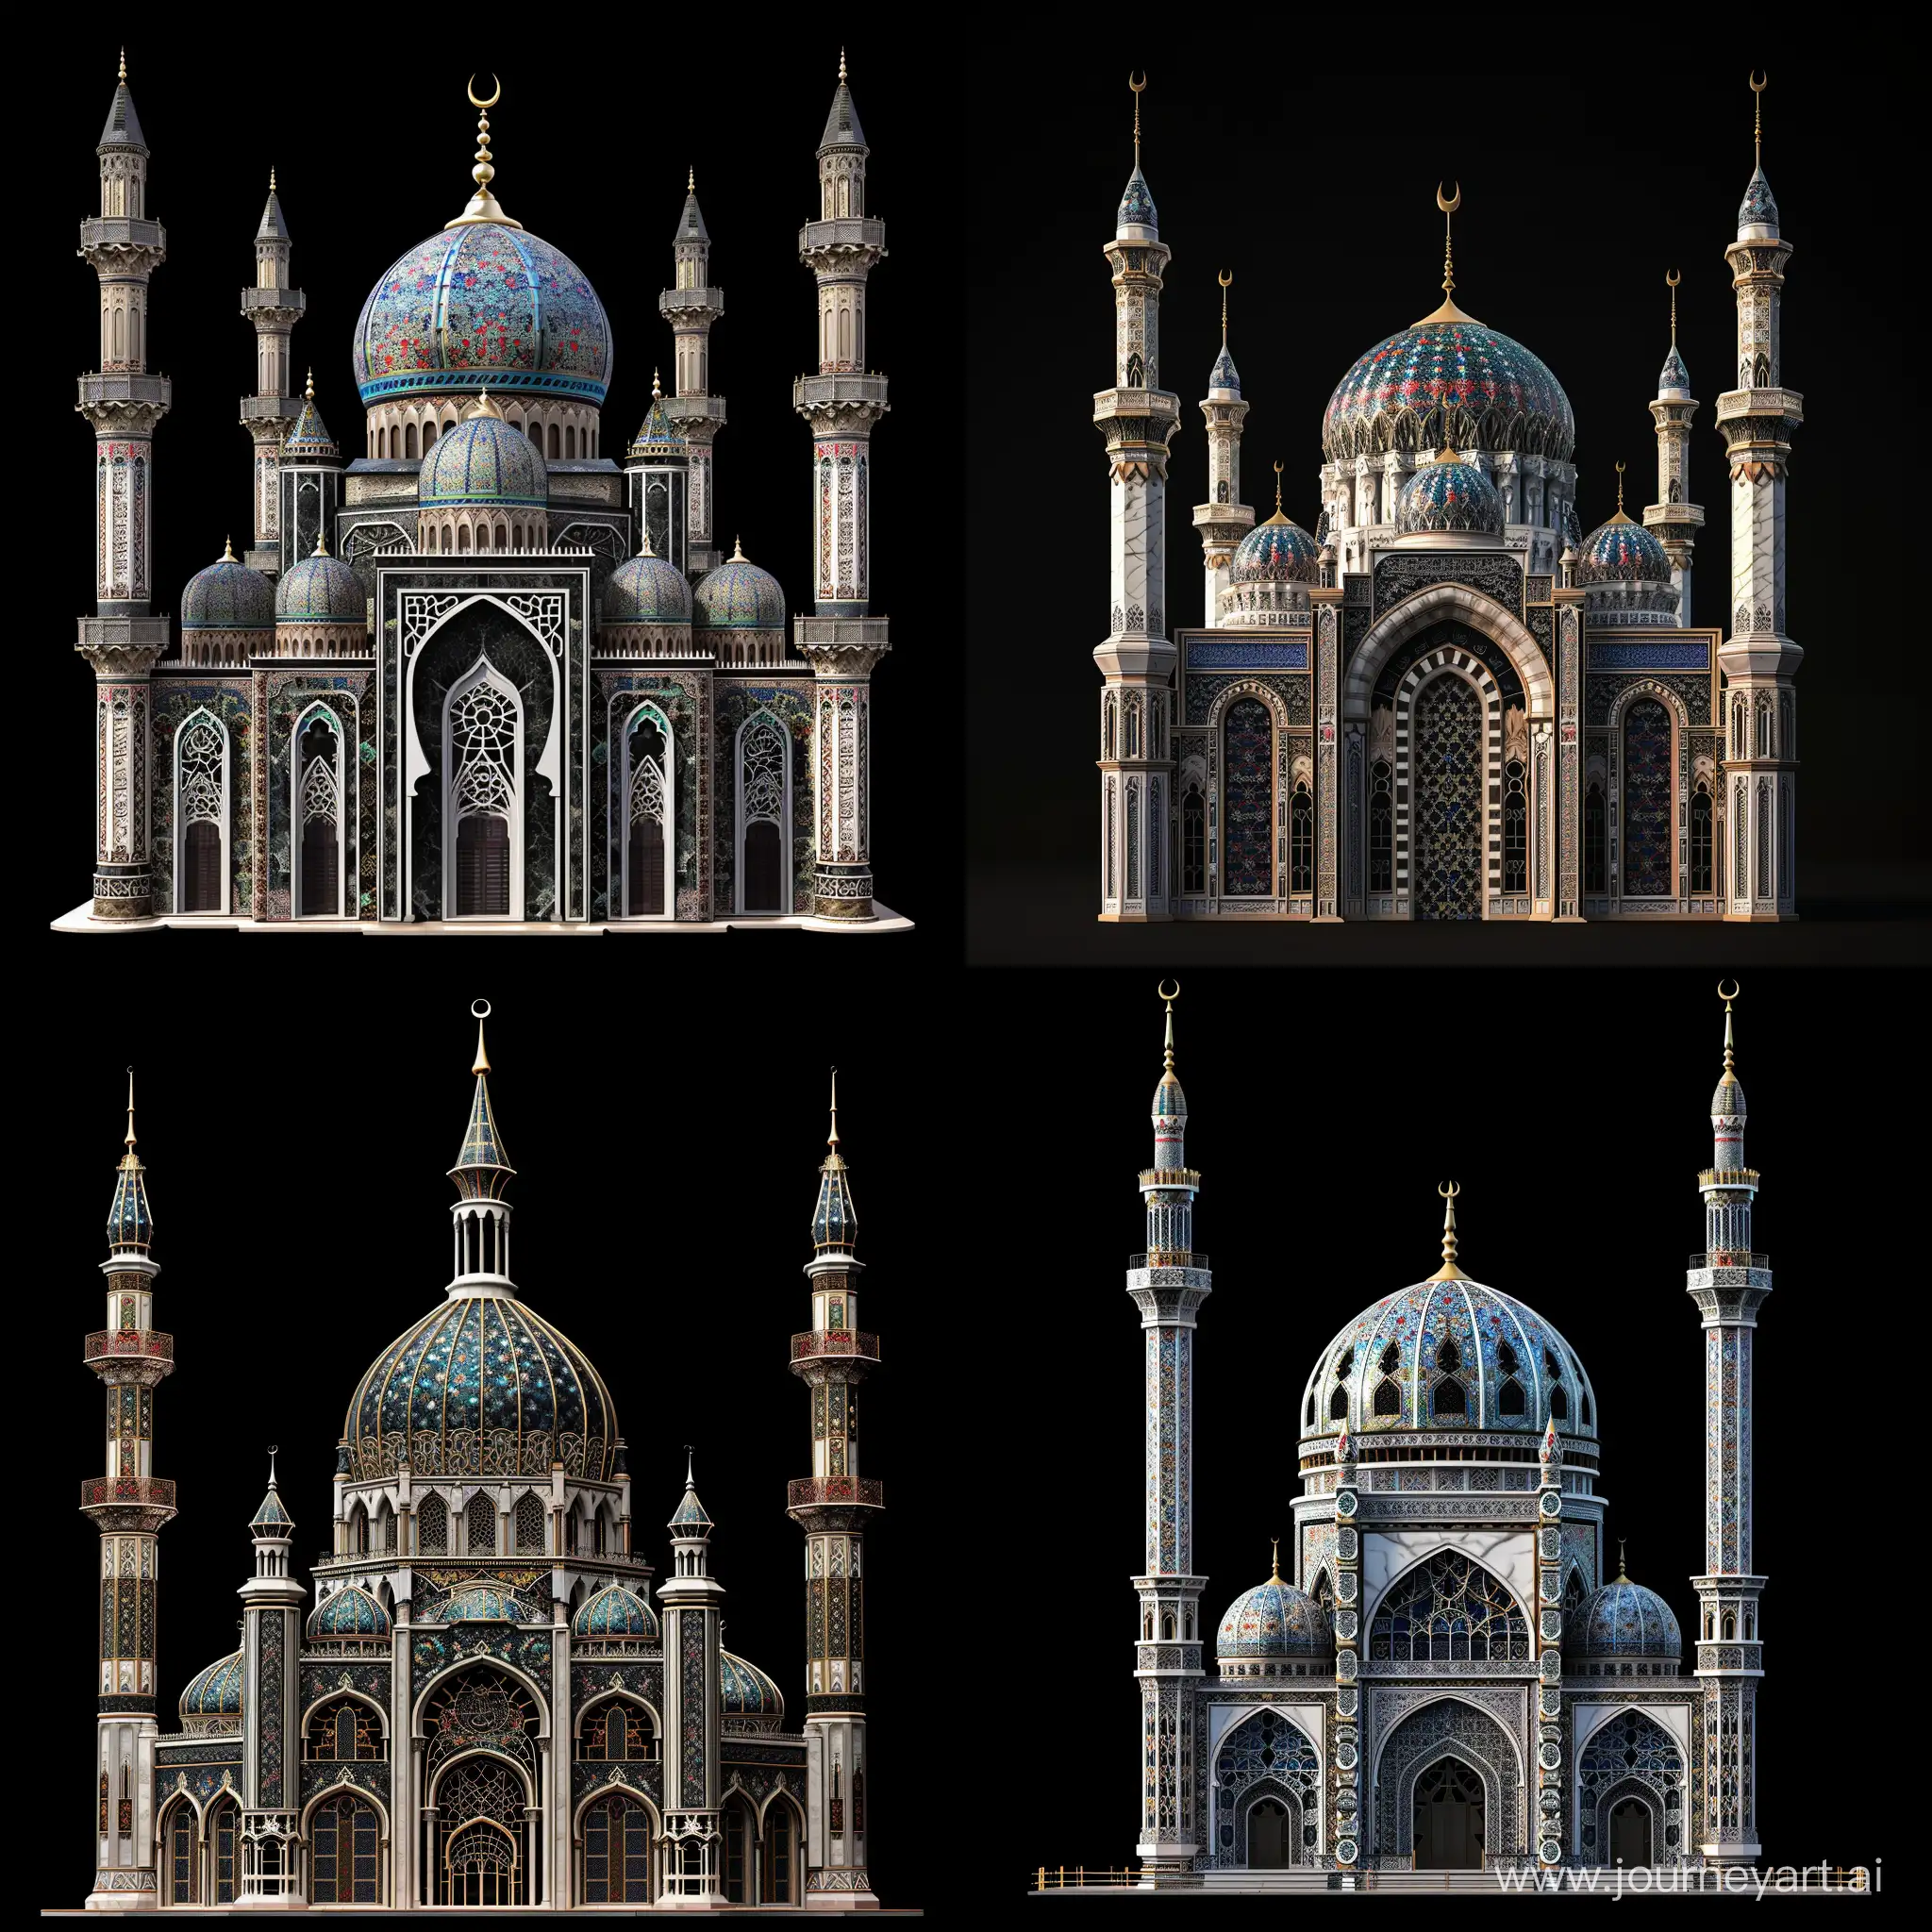 3d rendered: A tall highly ornamented cairo architecture mosque, timurid dome, thin decorative spires and mamluk minarets, Umayyad architecture patterned White black marbled facade, blue red finely thin floral Persian tiles on spandrels, islamic arabesque openwork lattice windows, shiny gold finial, multi storey, black background, full view, front view, symmetric